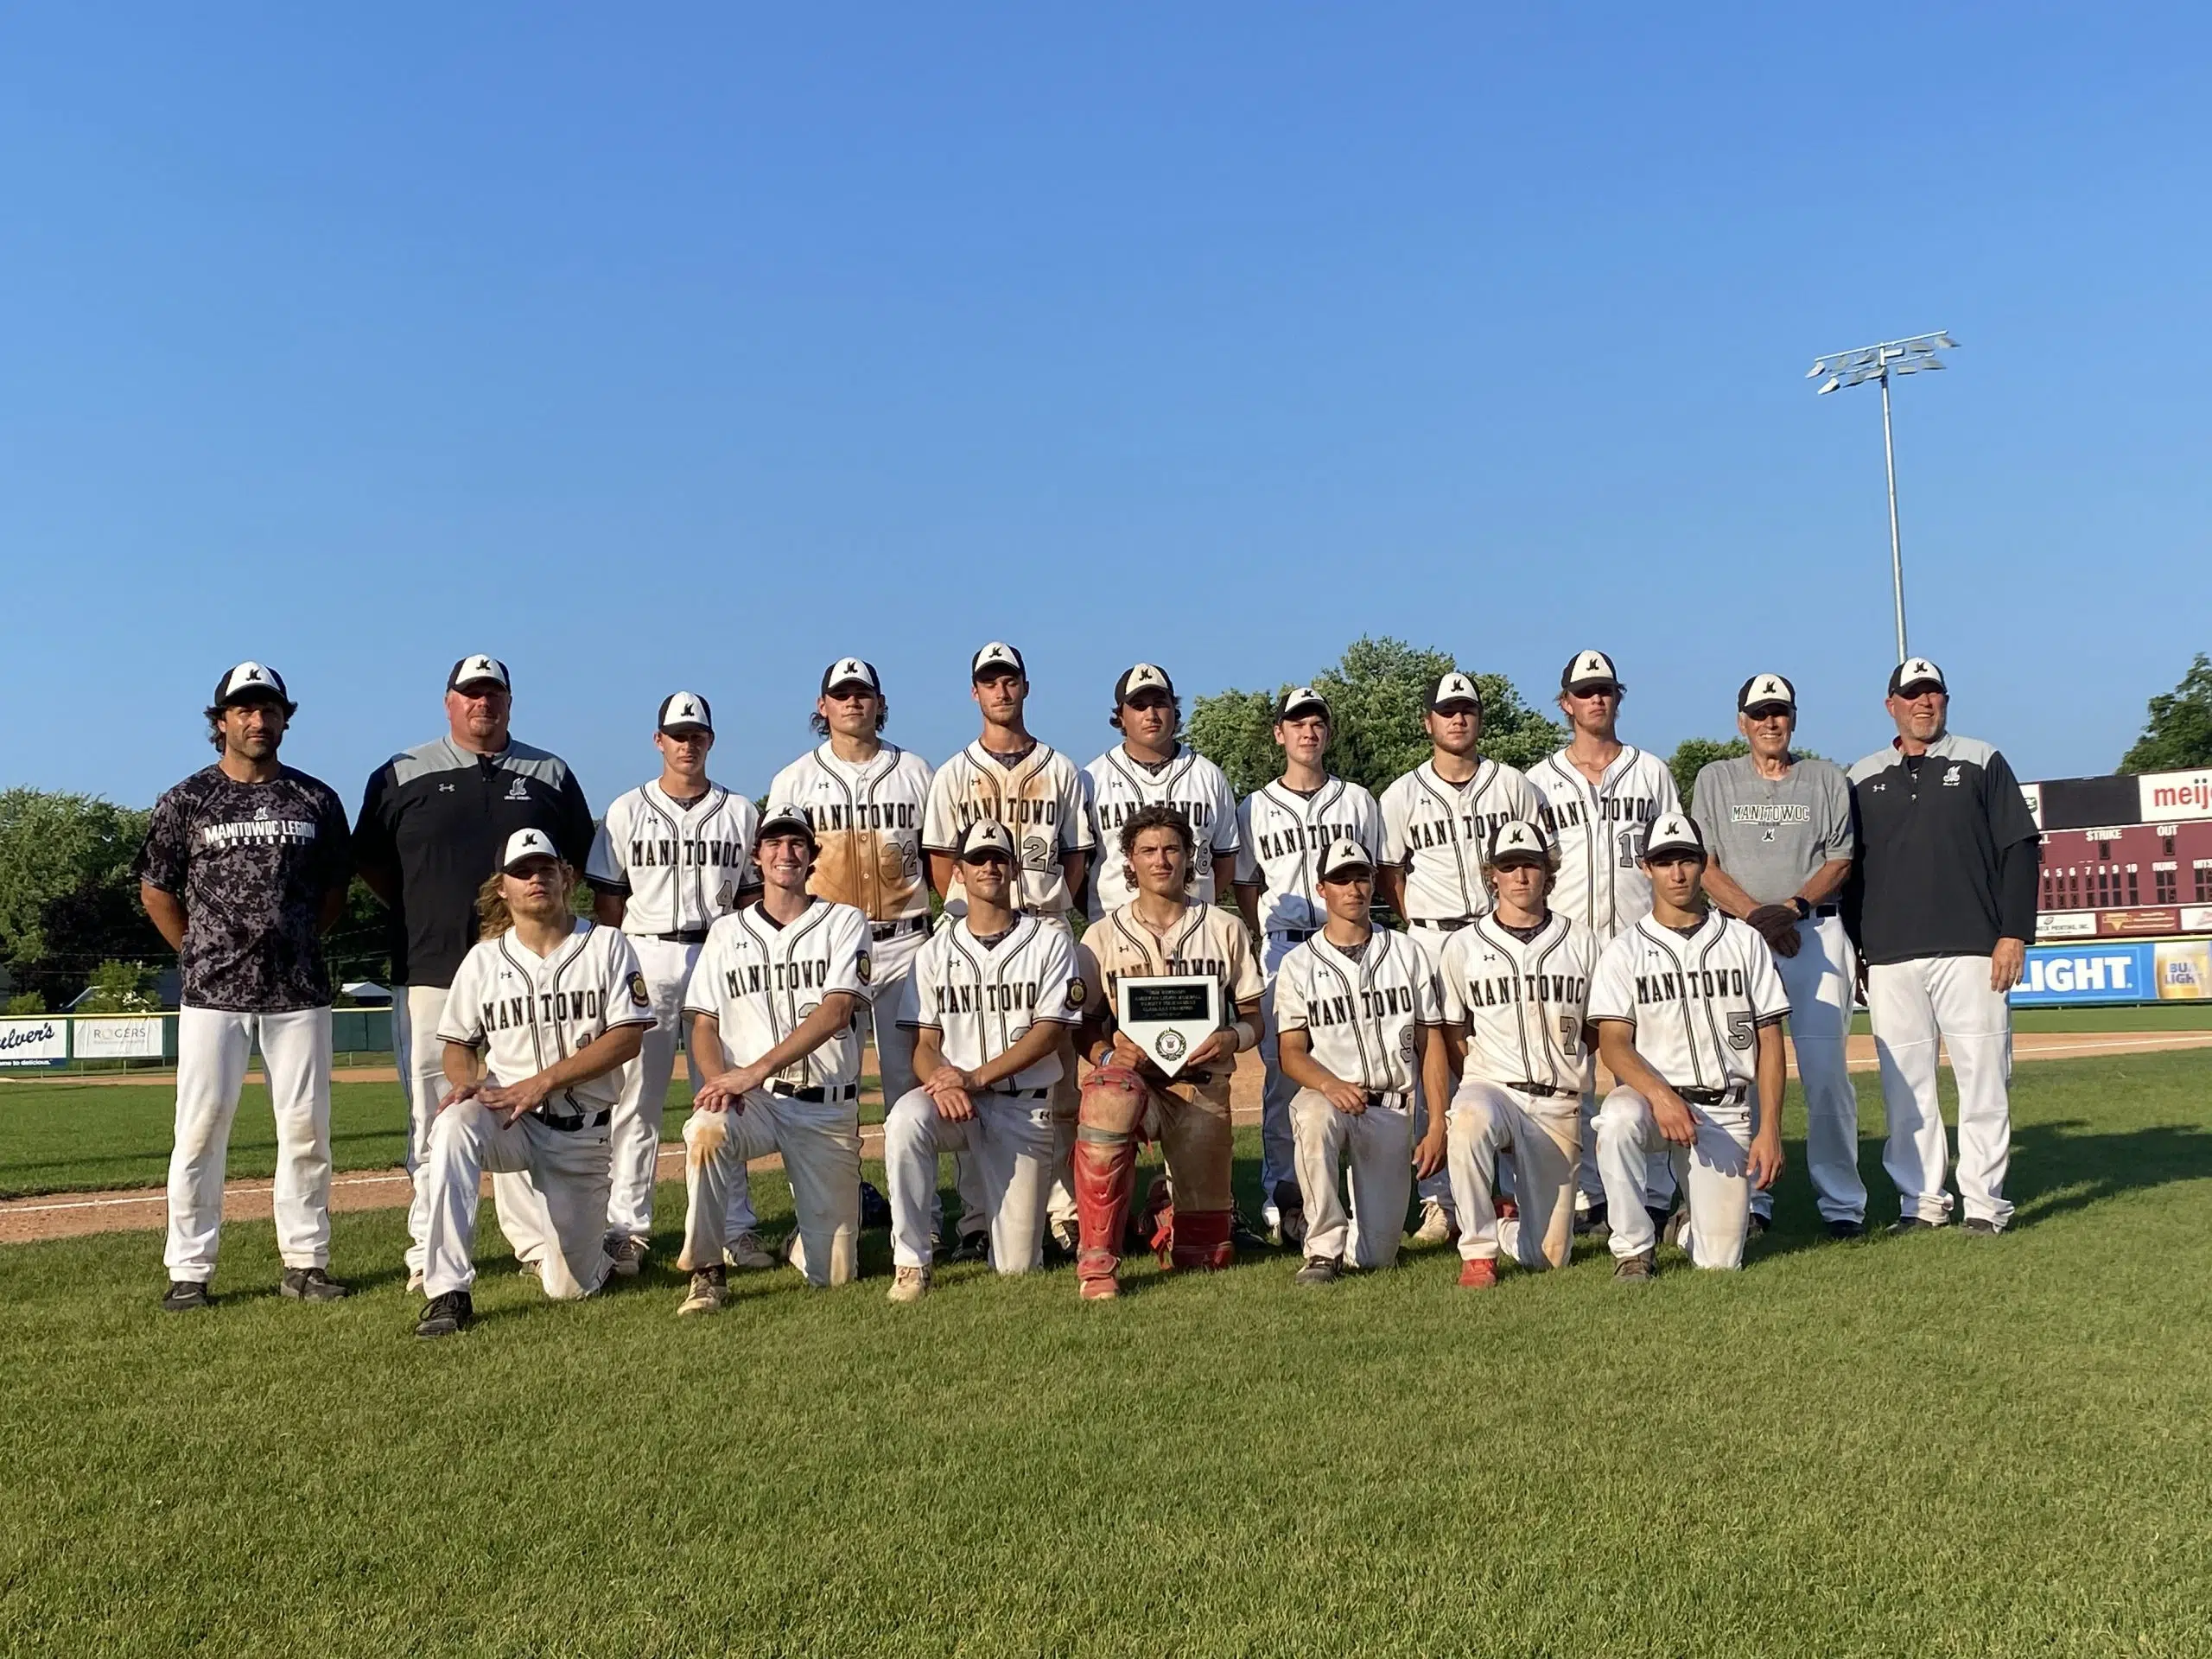 Legion Uses Fast Start to Defeat Fond du Lac and Qualify for State